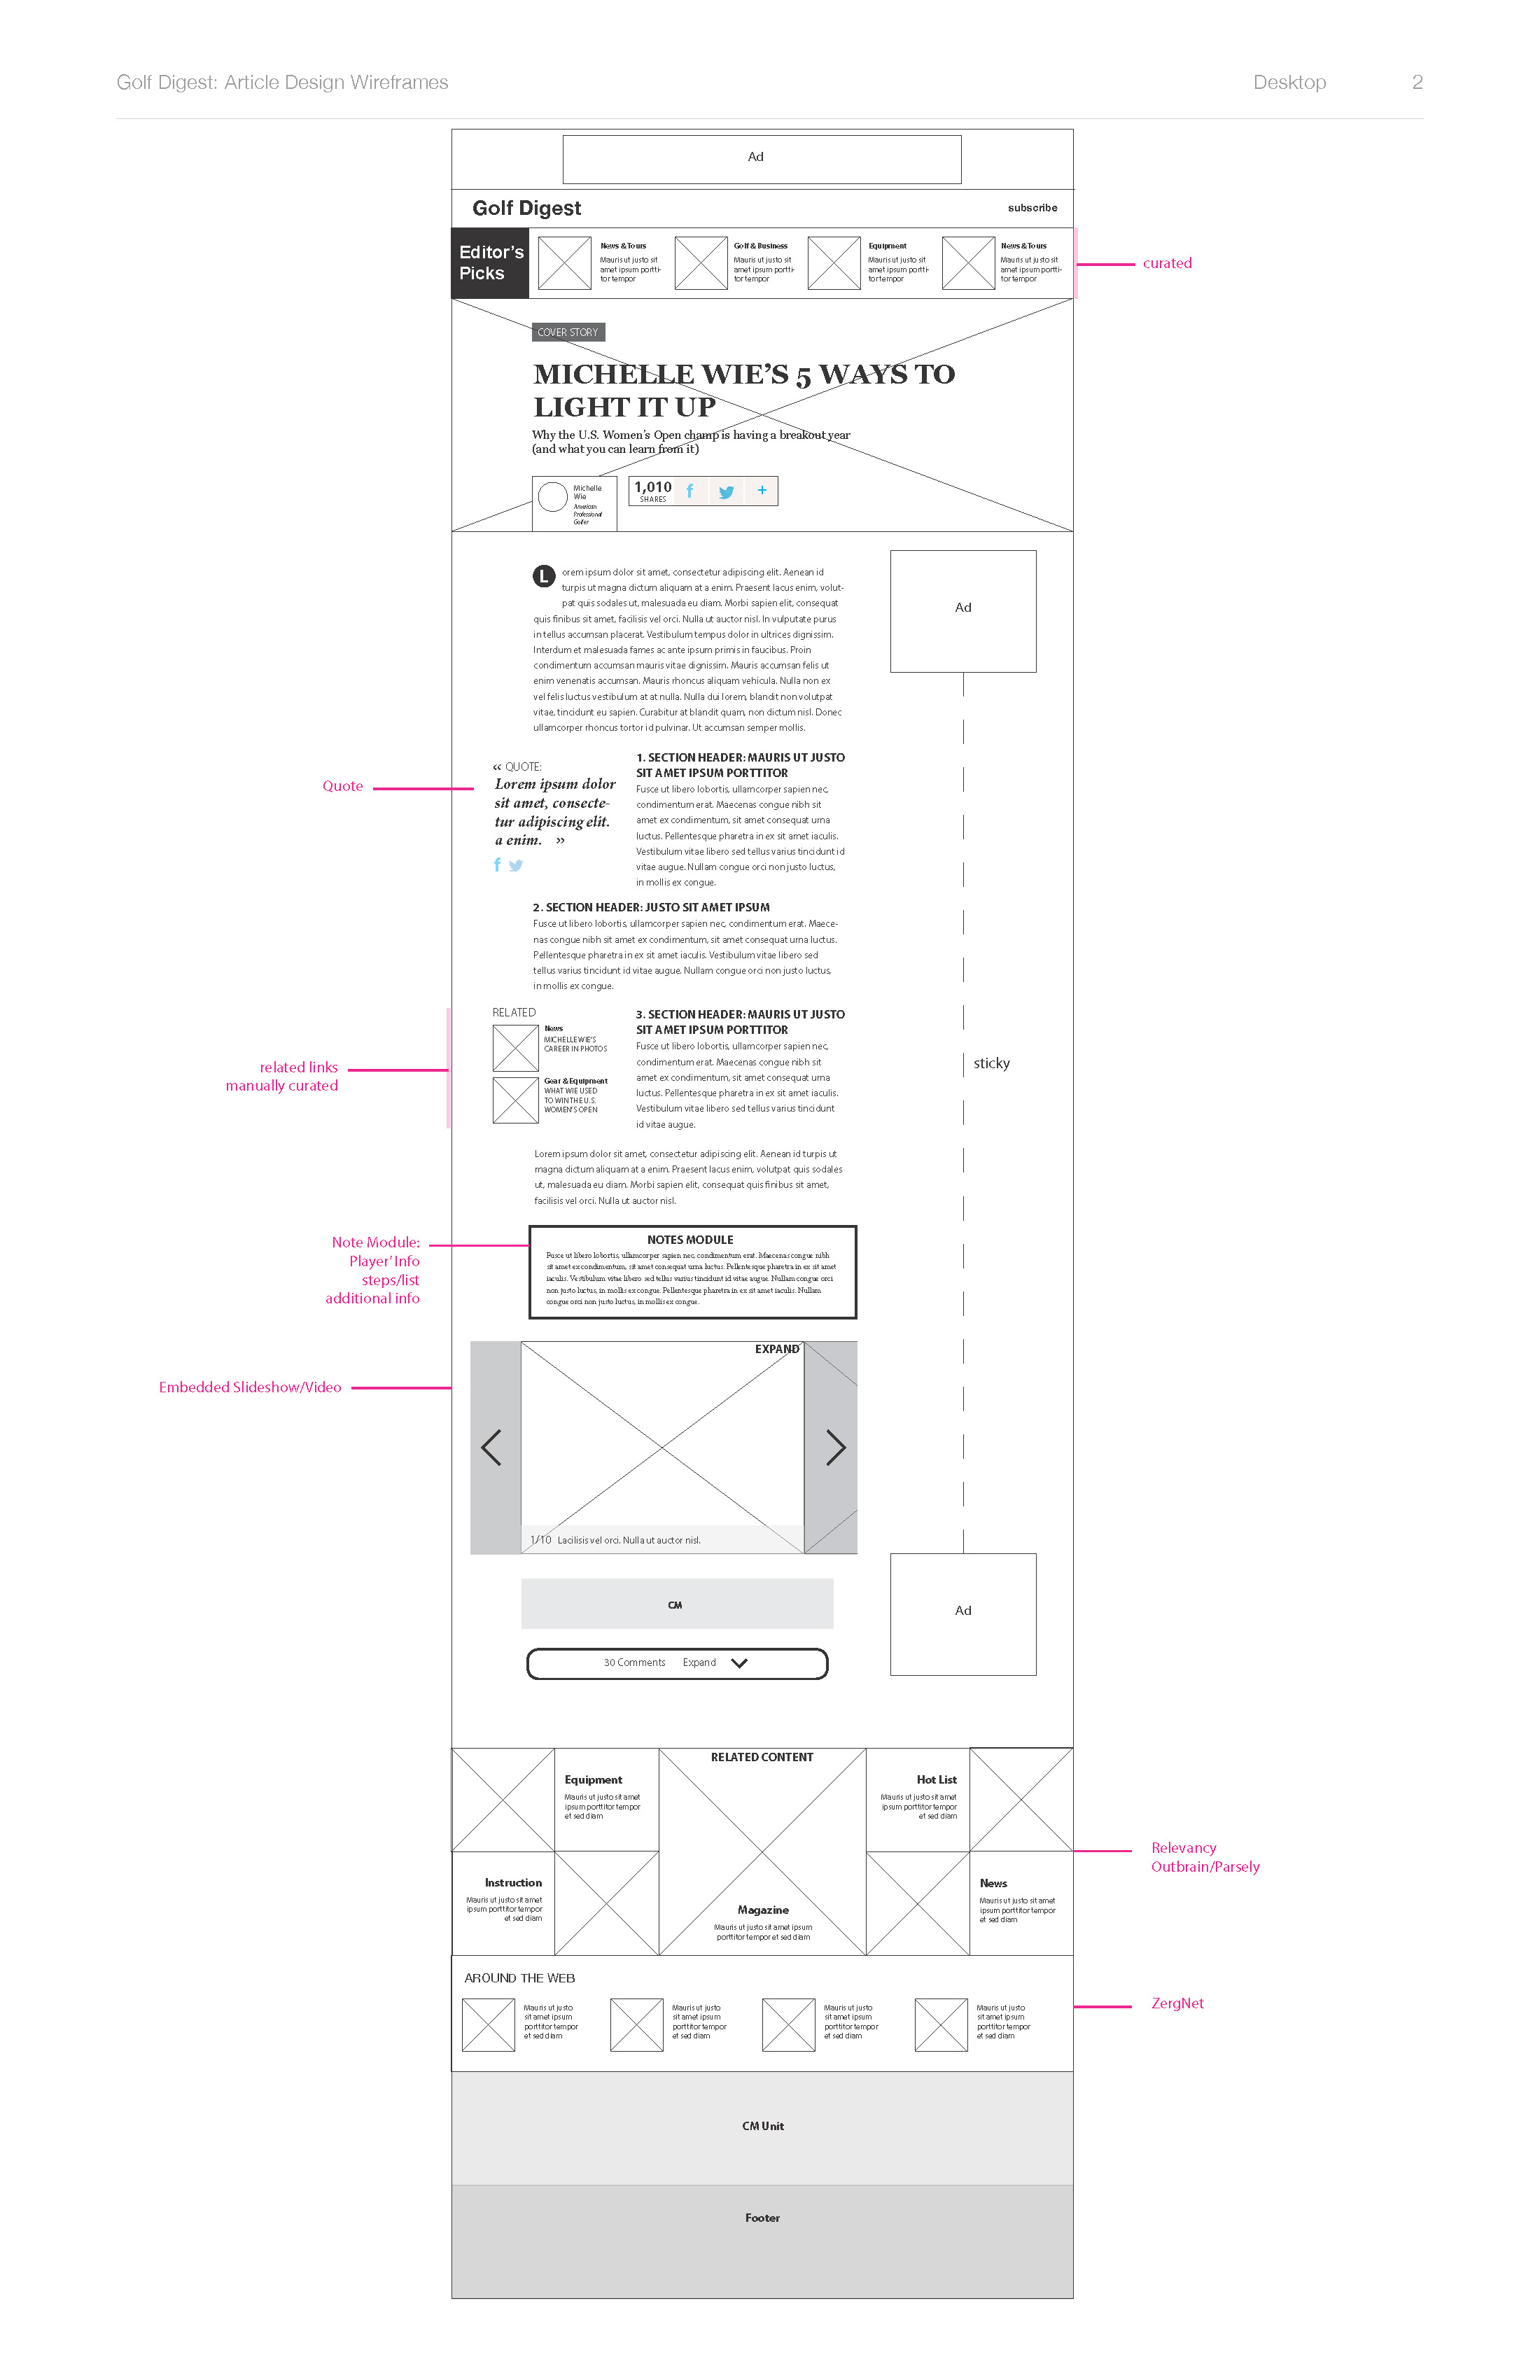 GD_Article_Wireframes_v2_Page_2.jpg